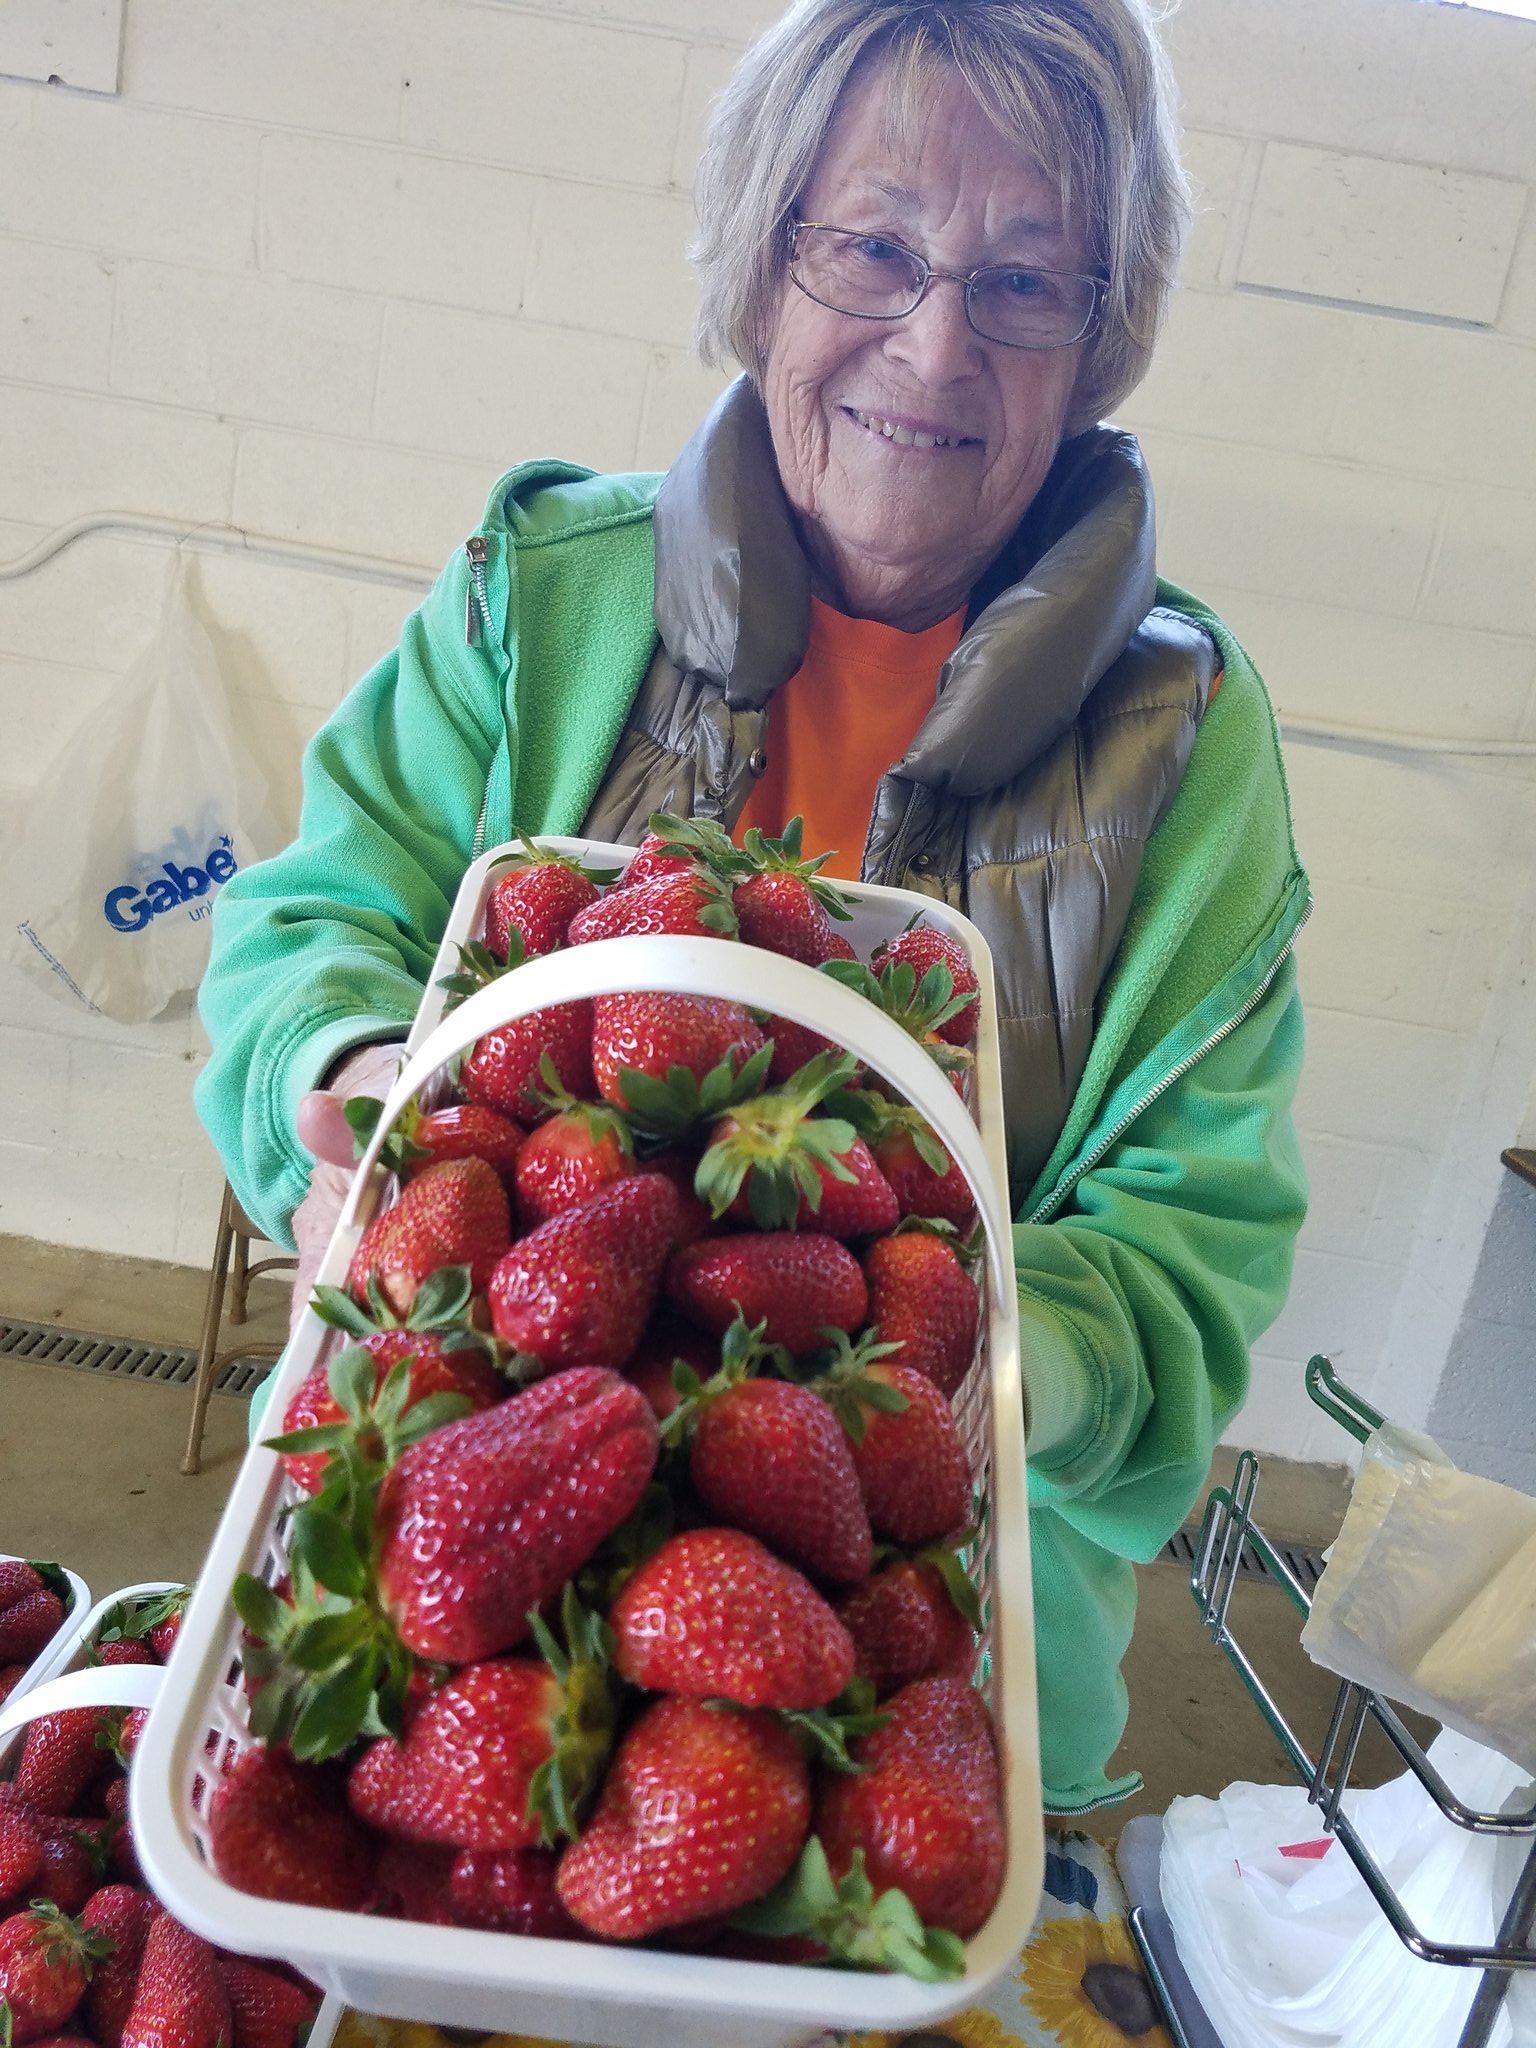 City Of Winston Salem Nc On Twitter Strawberries Are At The Ws Fairgrounds Farmers Market They Expect A Short Strawberry Season This Year We Re Open Until 1pm Https T Co Uuuu2lvggh,Shrimp Newburg